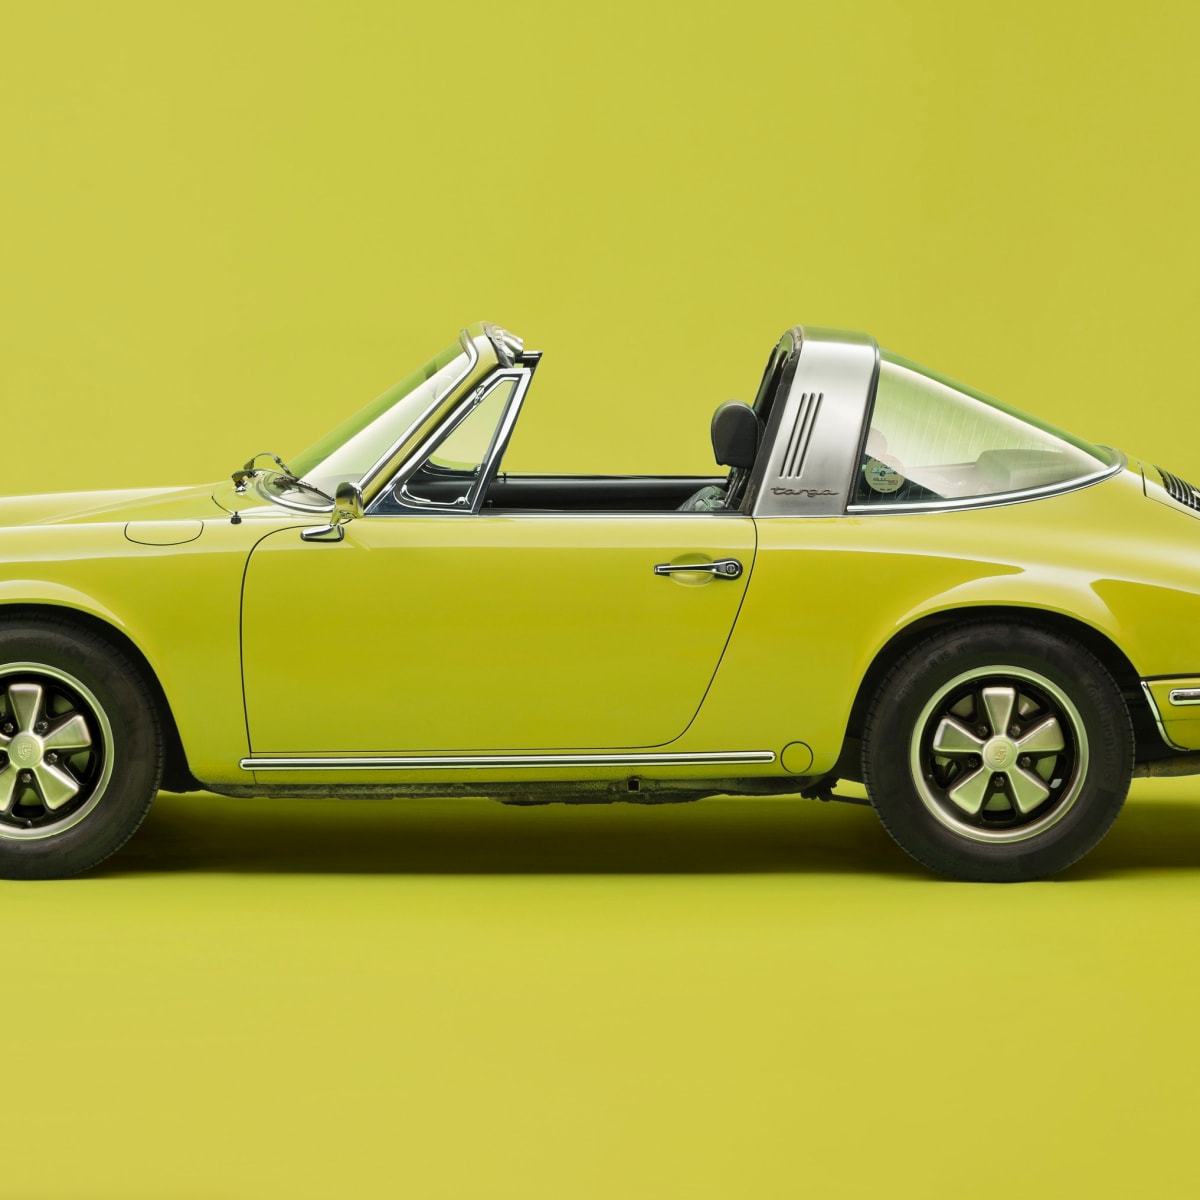 Stop Everything and Add This Gorgeous Porsche 911 Book to Your Coffee Table  - Airows